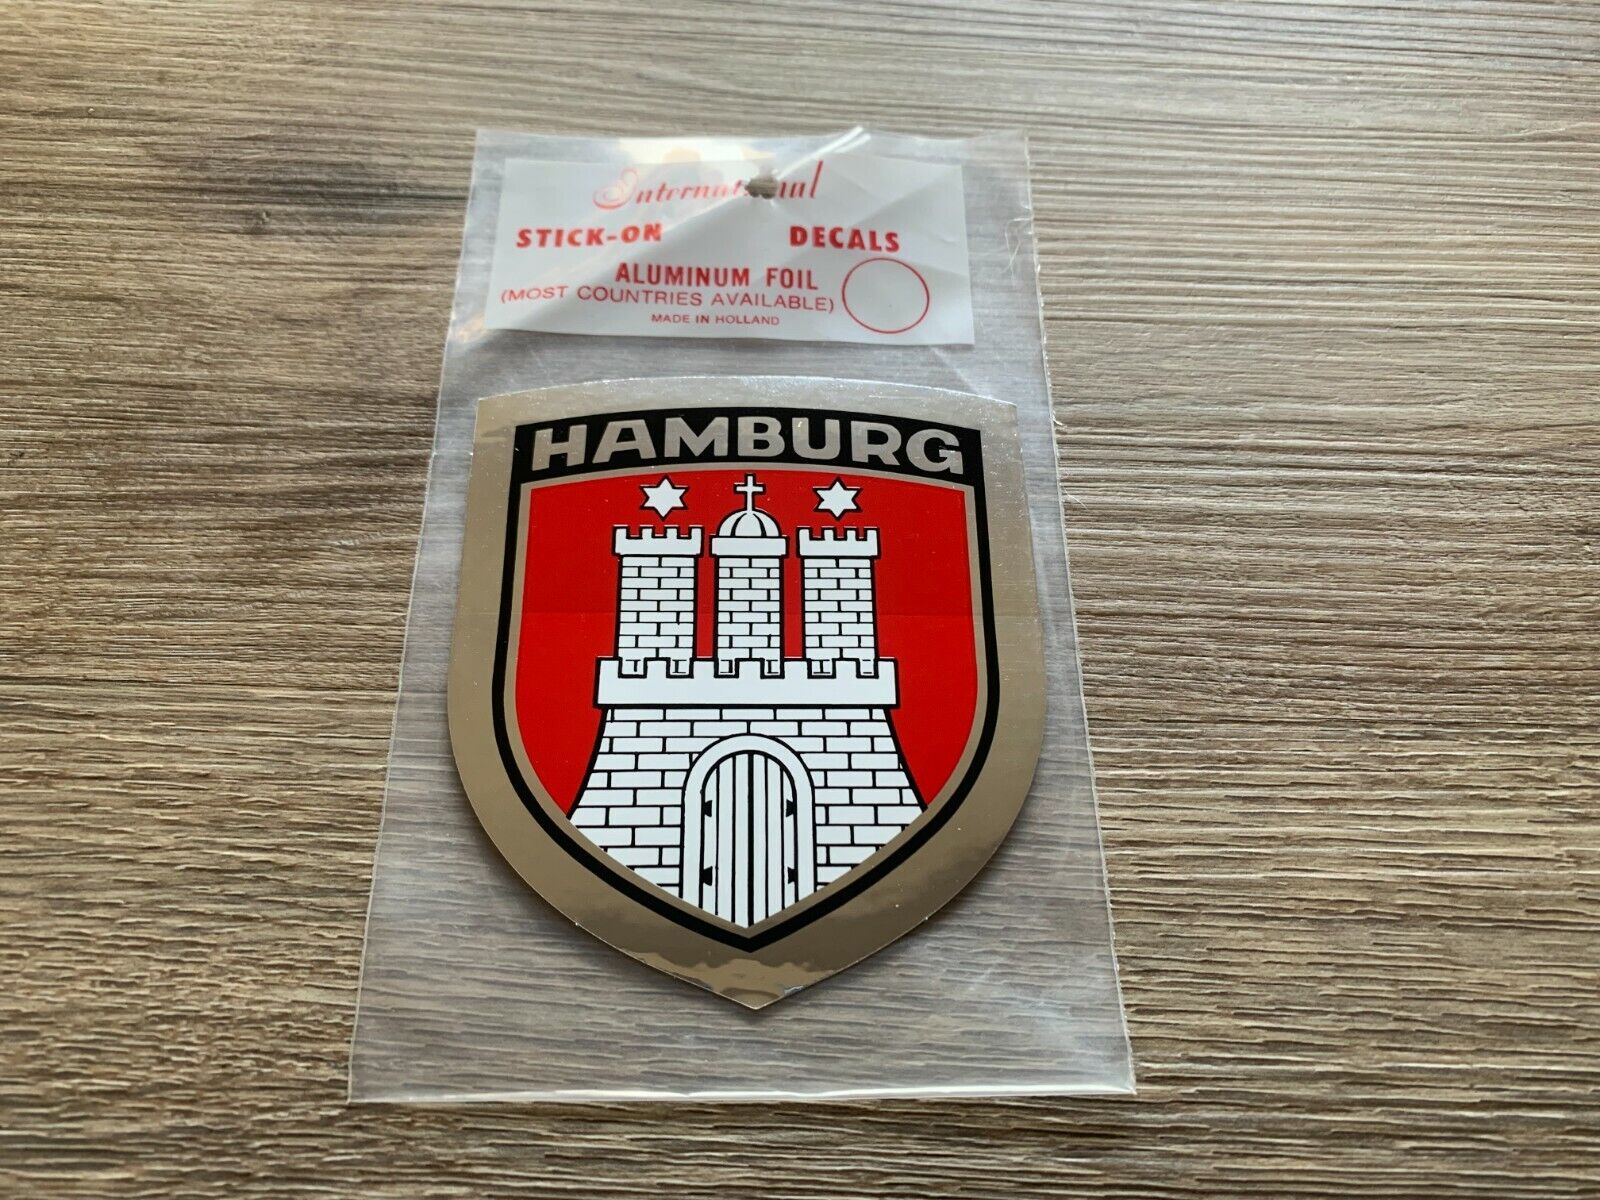 VINTAGE HAMBURG ALIMEX ALUMINUM FOIL DECAL STICKER NEW NOS MADE IN HOLLAND